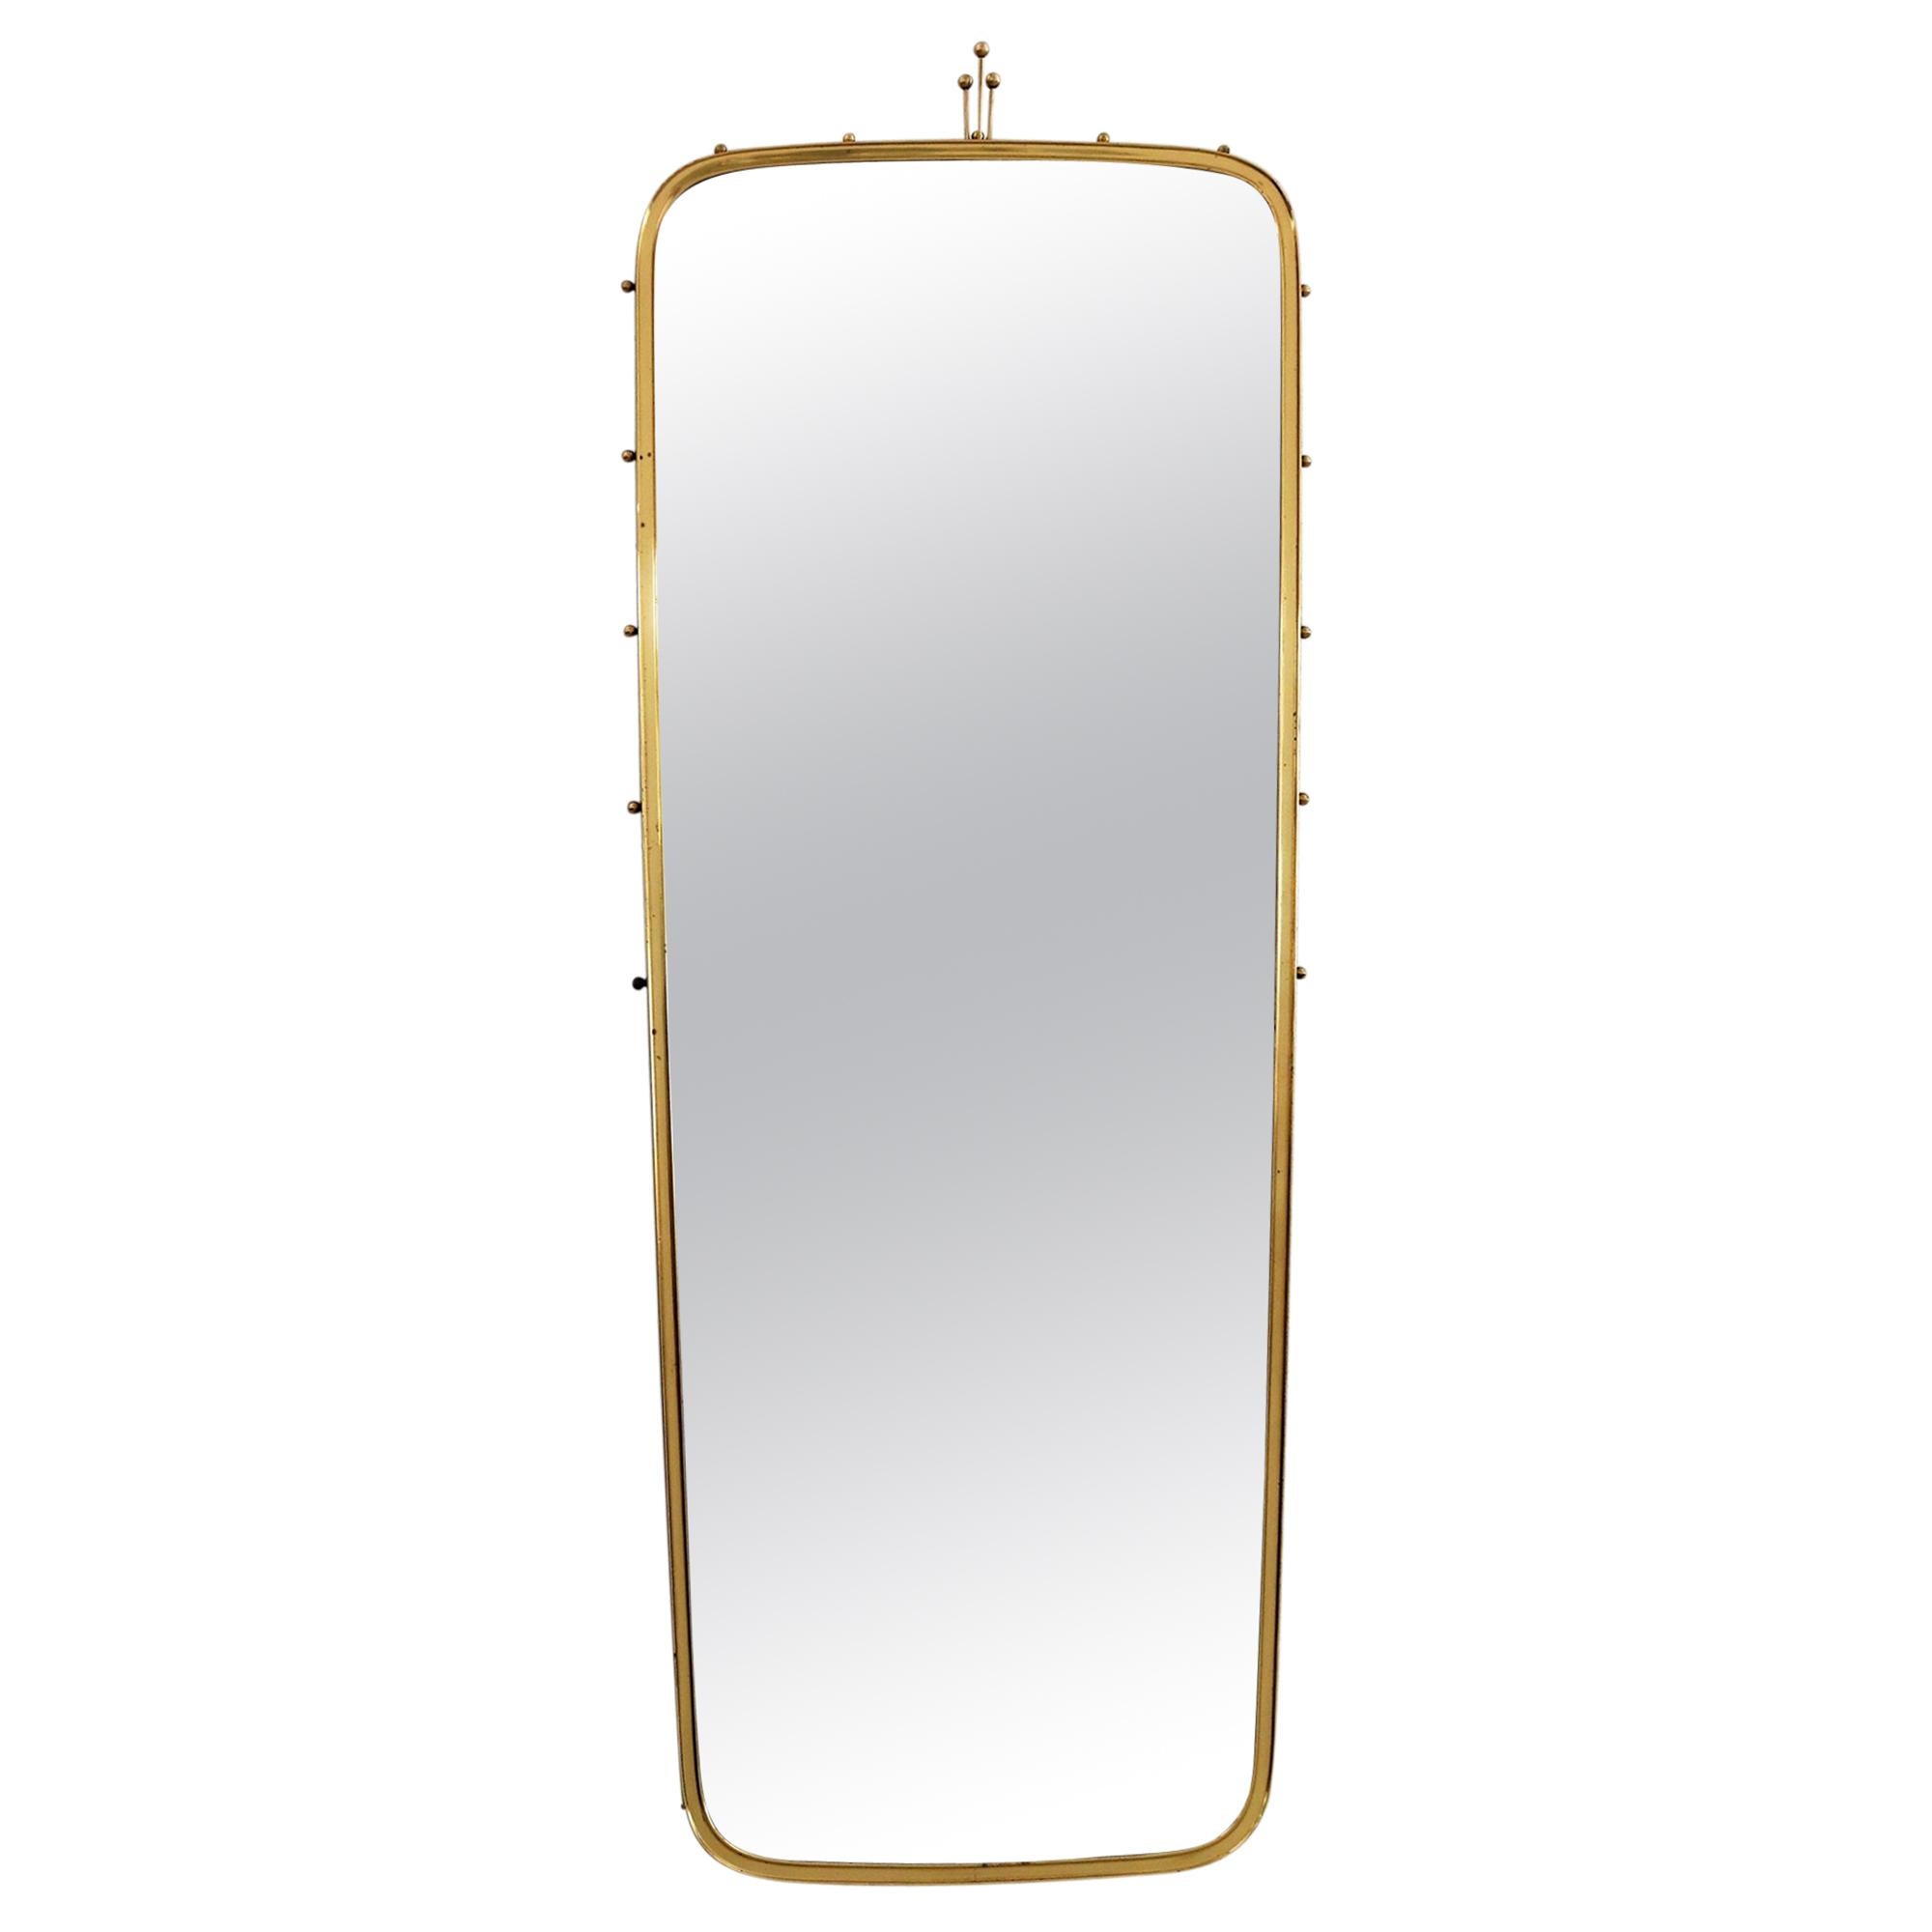 Vintage Midcentury Wall Mirror with Brass Frame, 1970s